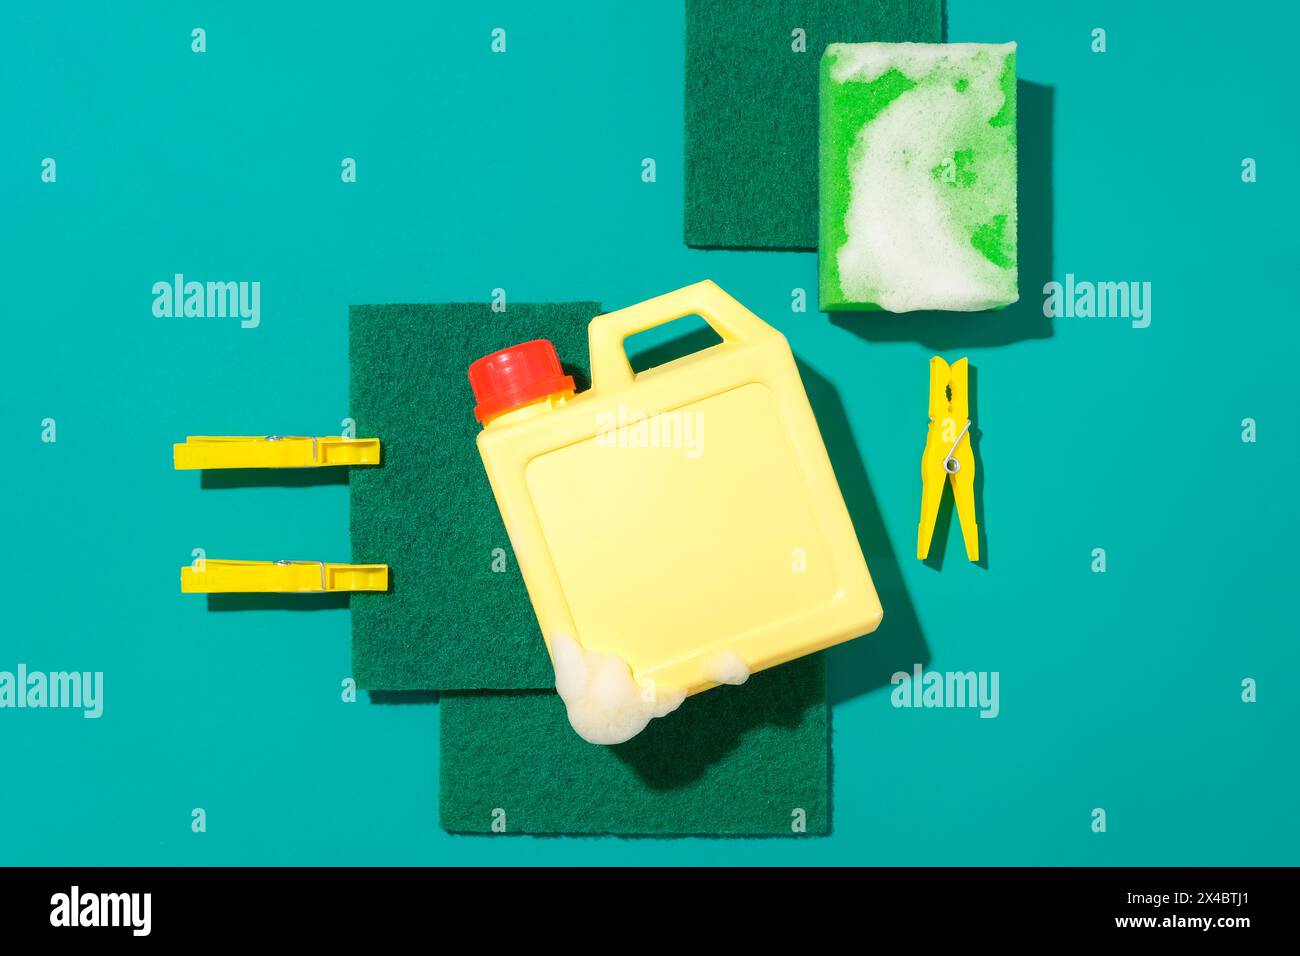 Close-up of an unlabeled detergent bottle next to a sponge and yellow clothespins on a turquoise background. Advertising space for cleaning products. Stock Photo